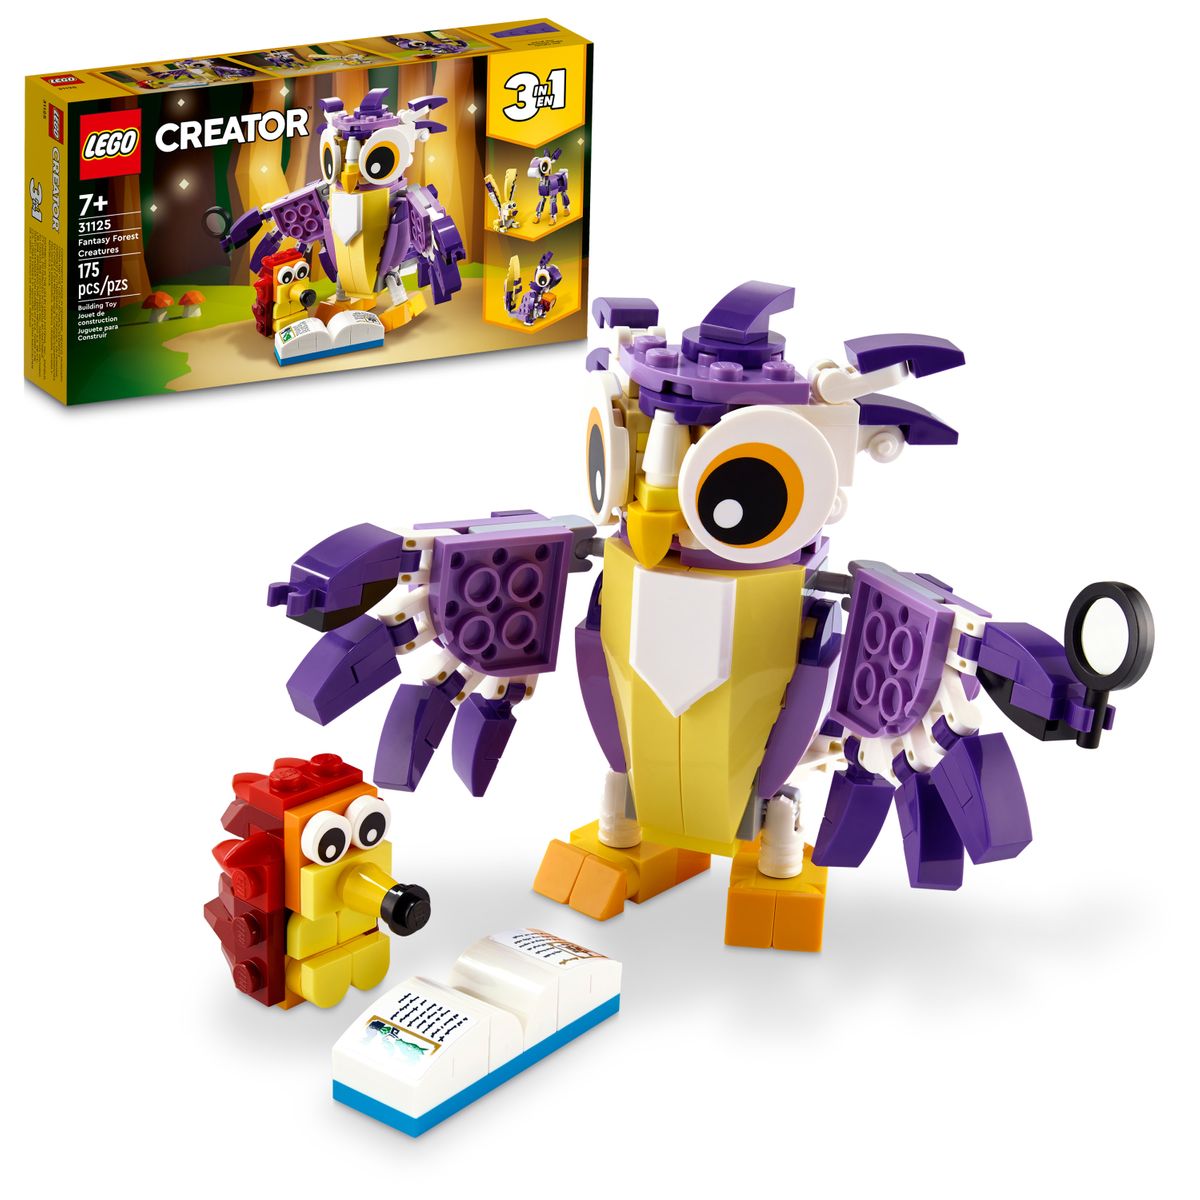 [RDY] [送料無料] LEGO Creator 3in1 Fantasy Forest Creatures 31125 Building Kit featuring Owl, Rabbit and Squirrel; Animal Toys for Kids Aged 7+ who loves Creative Fun and Animal Models 175 pieces [楽天海外通販] | LEGO Creator 3in1 Fantasy Fores